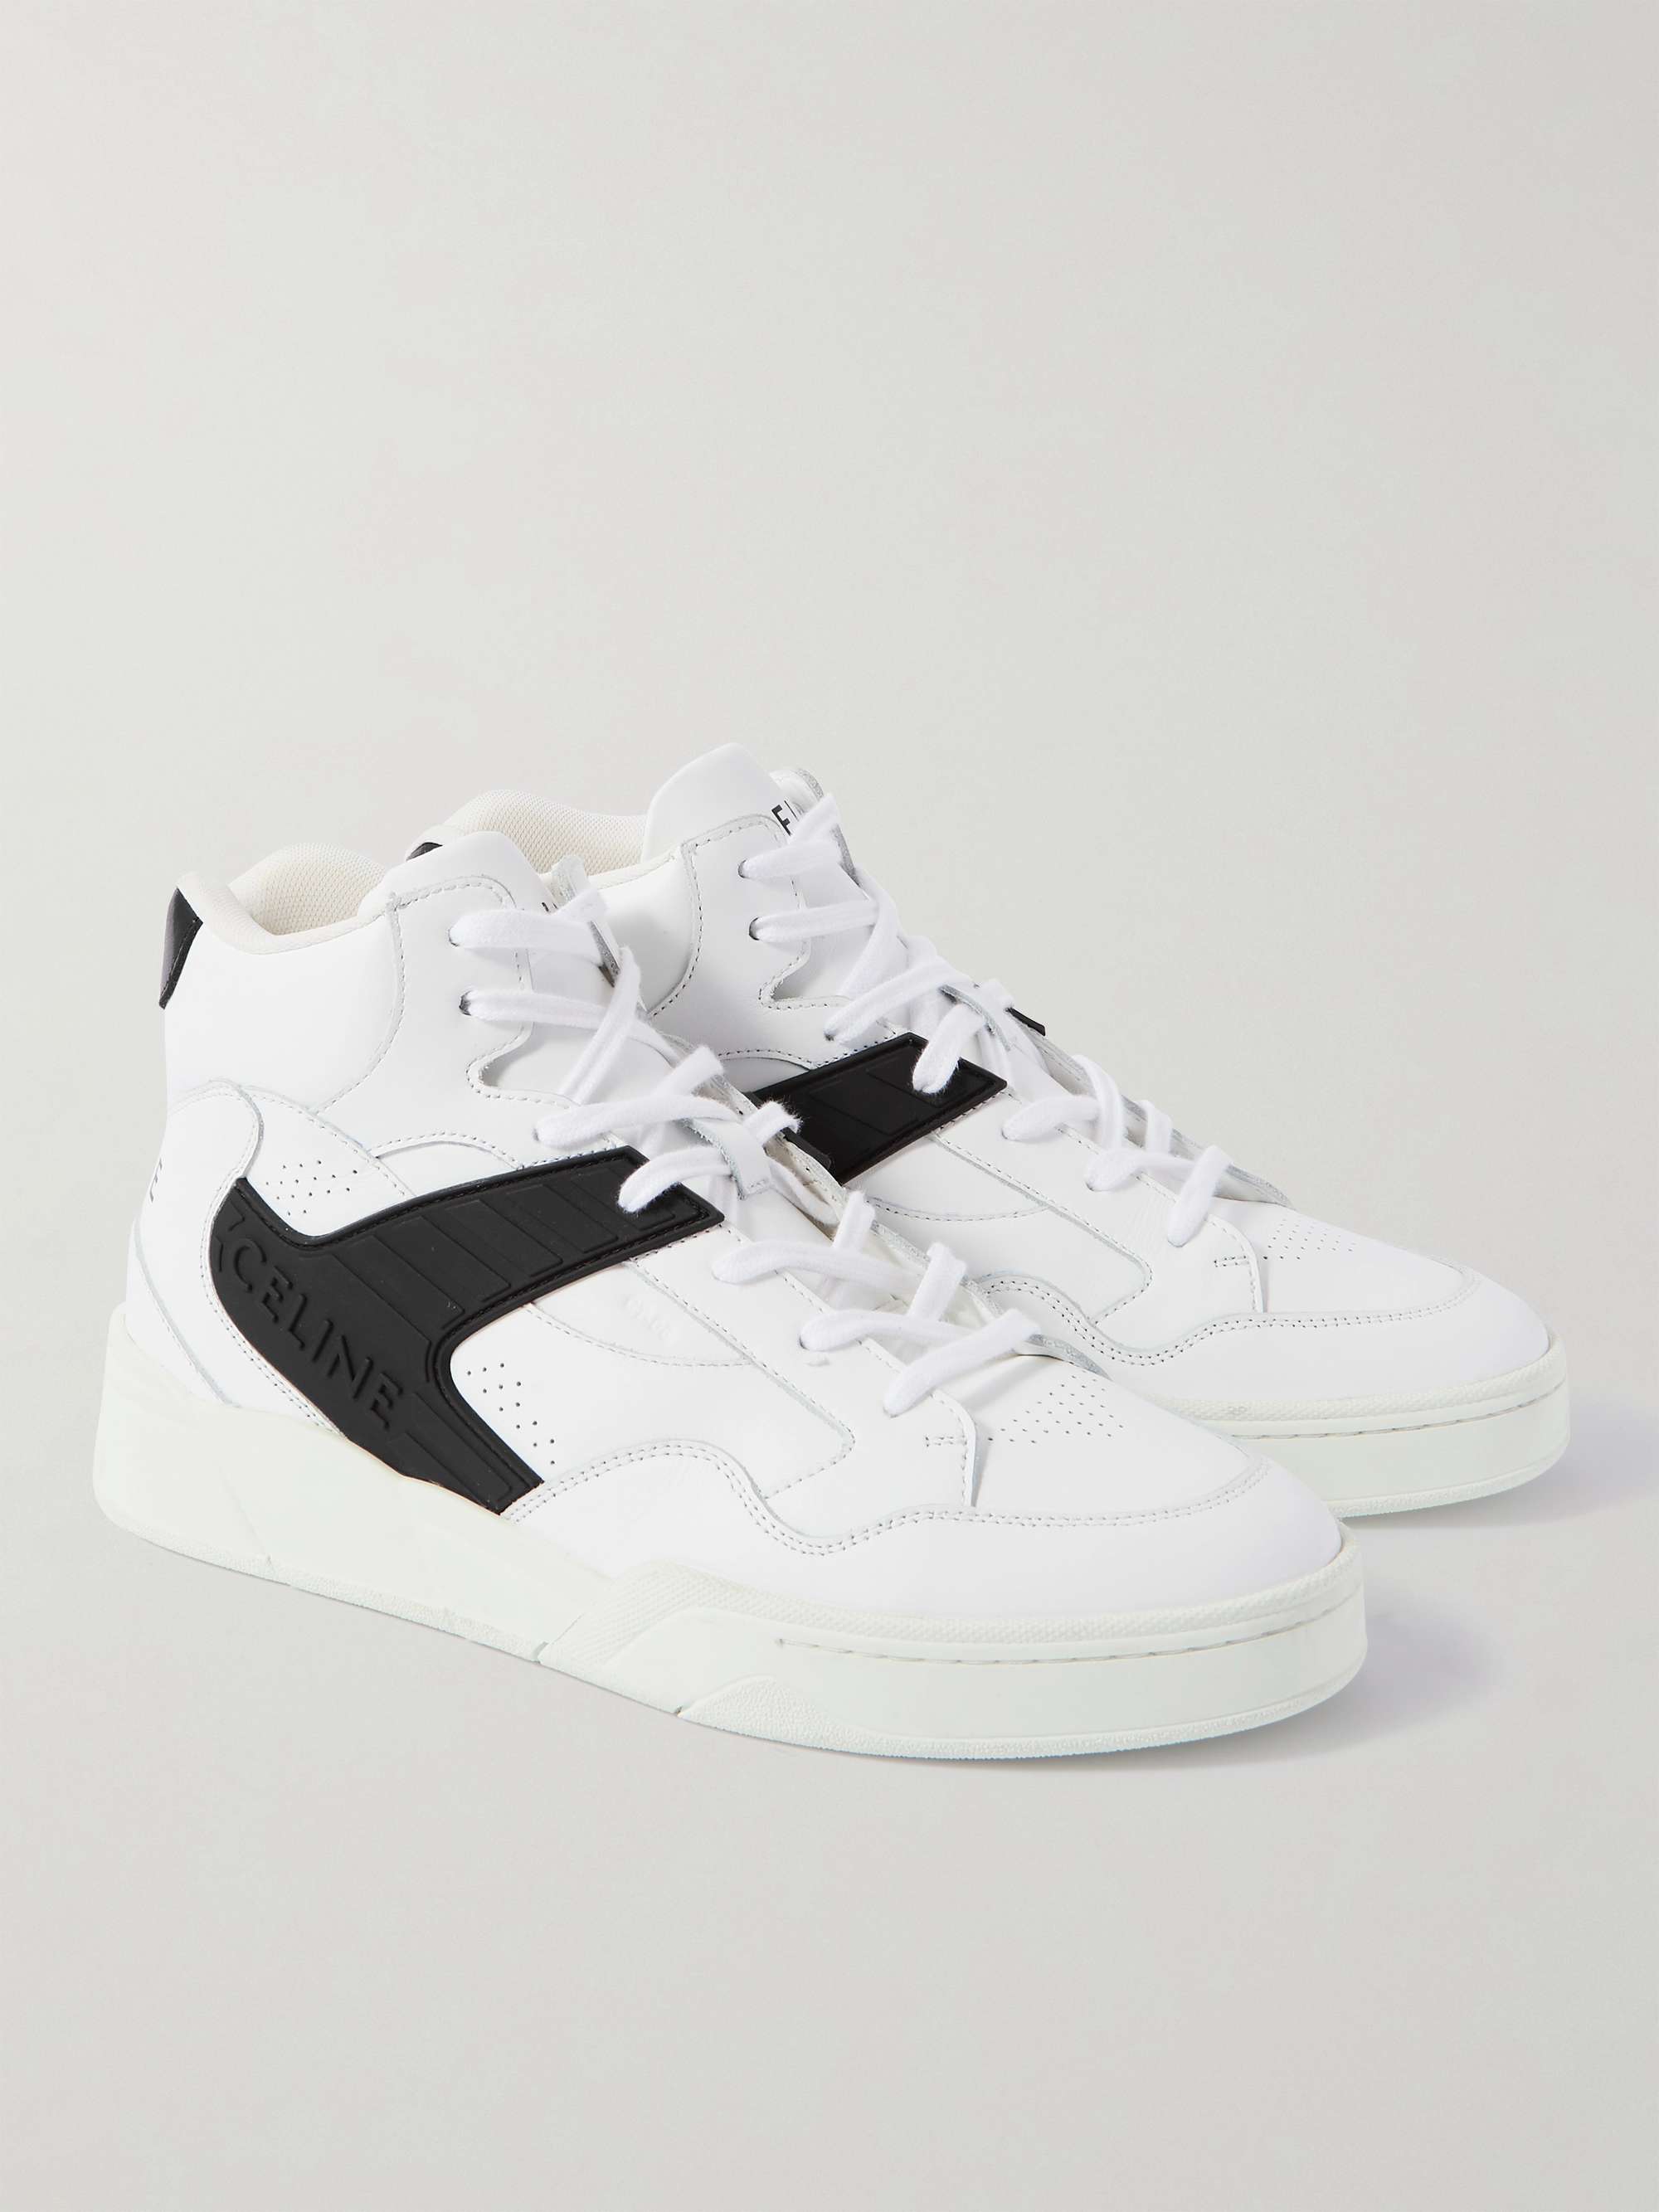 CELINE HOMME CT-06 Rubber-Trimmed Leather High-Top Sneakers